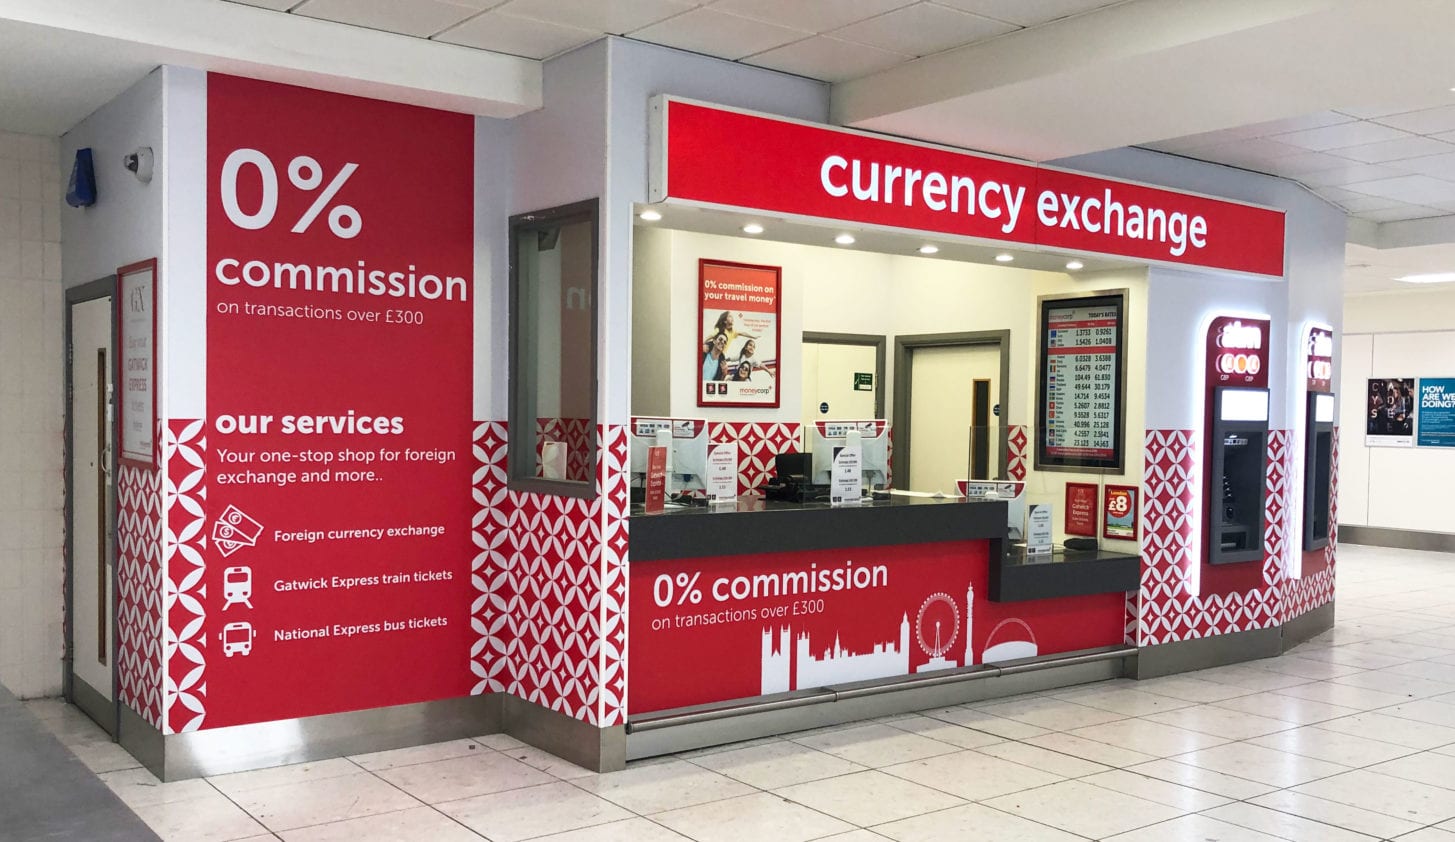 moneycorp airport retail popup